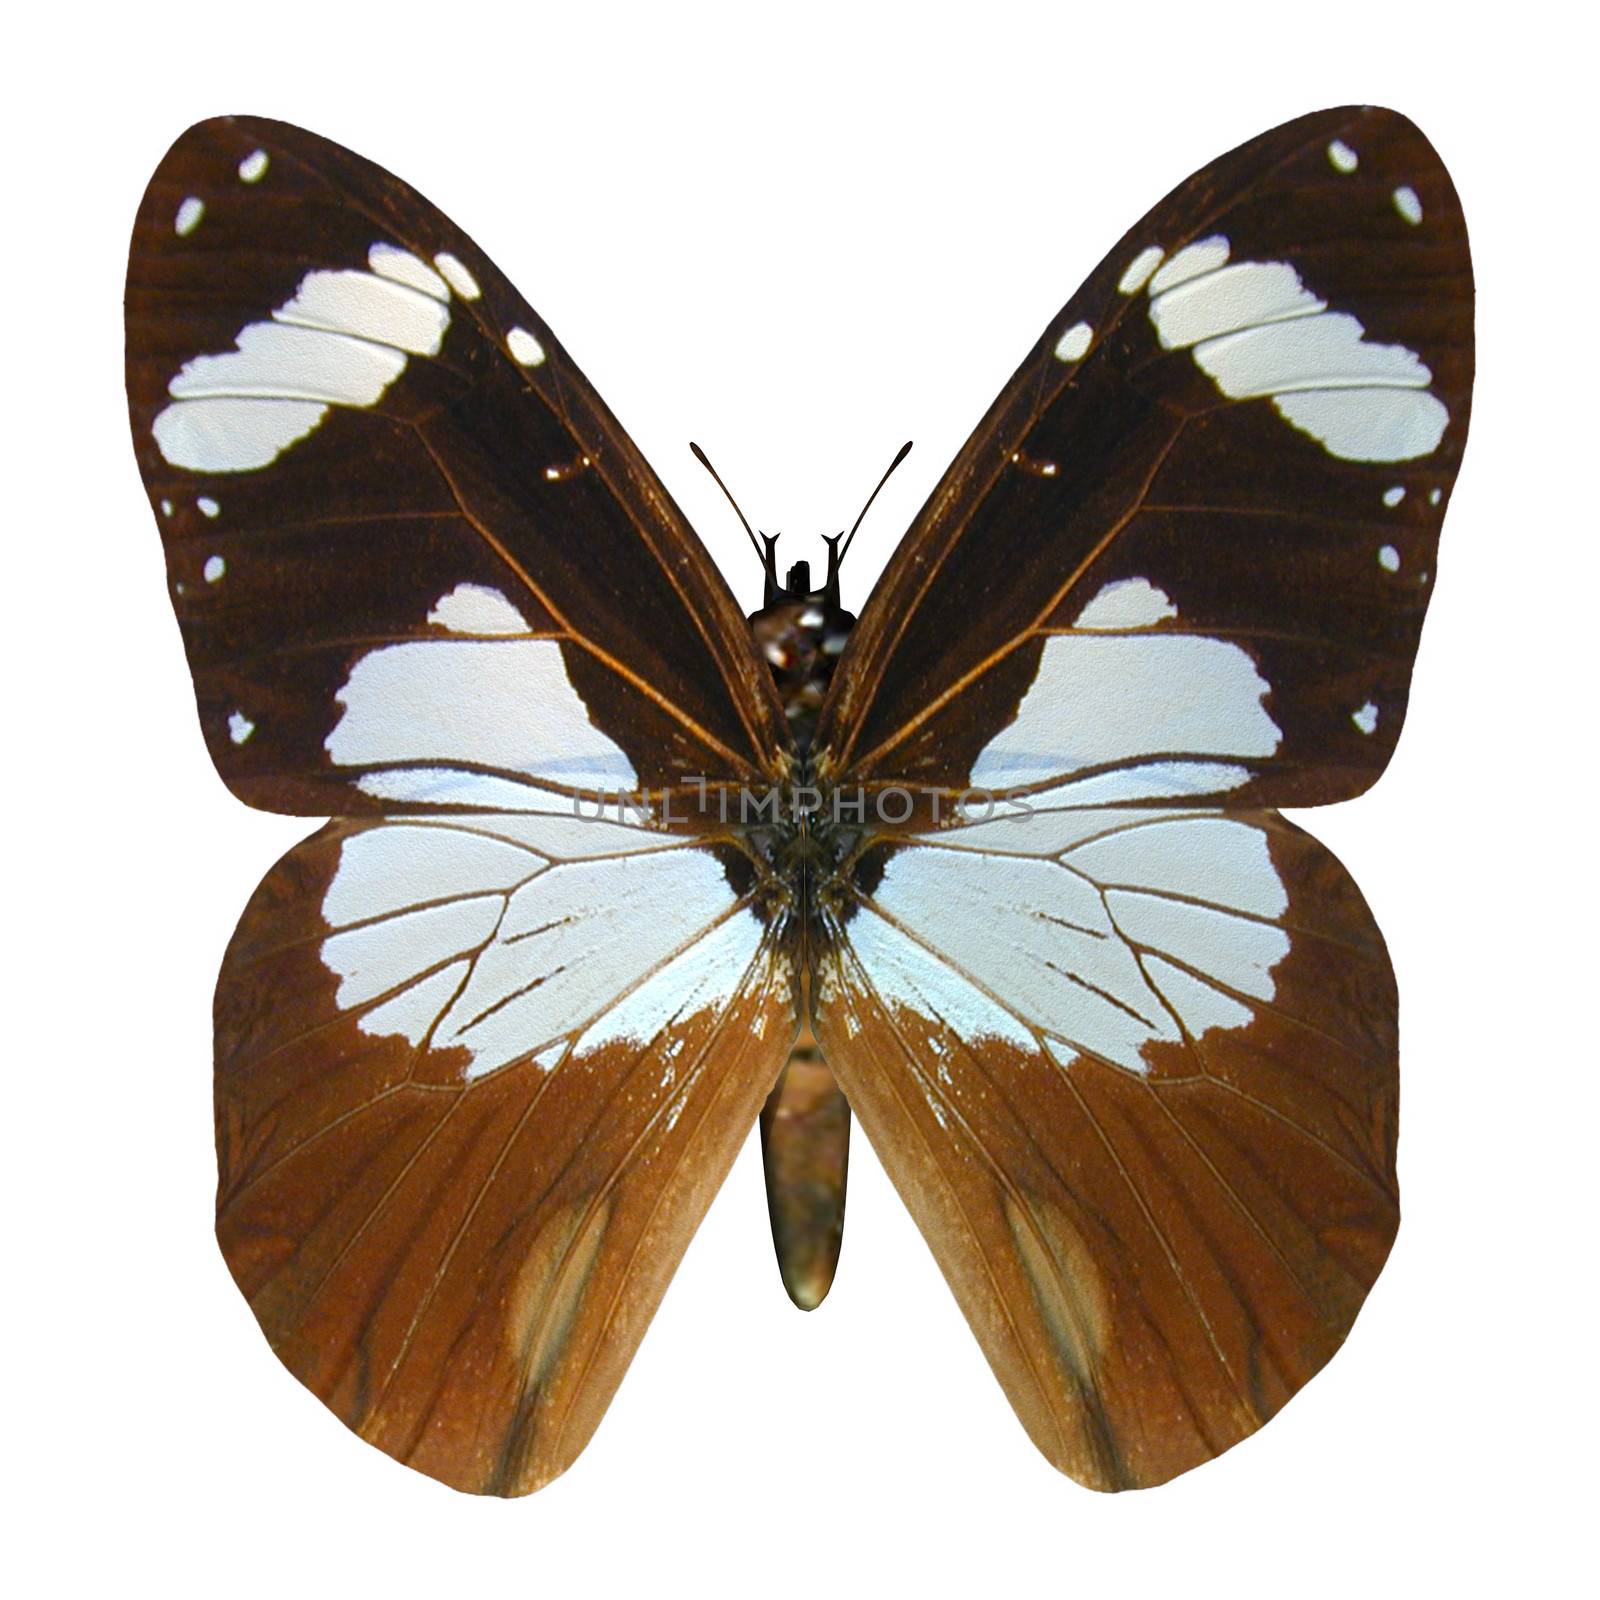 Ivory Merchant Butterfly by Vac